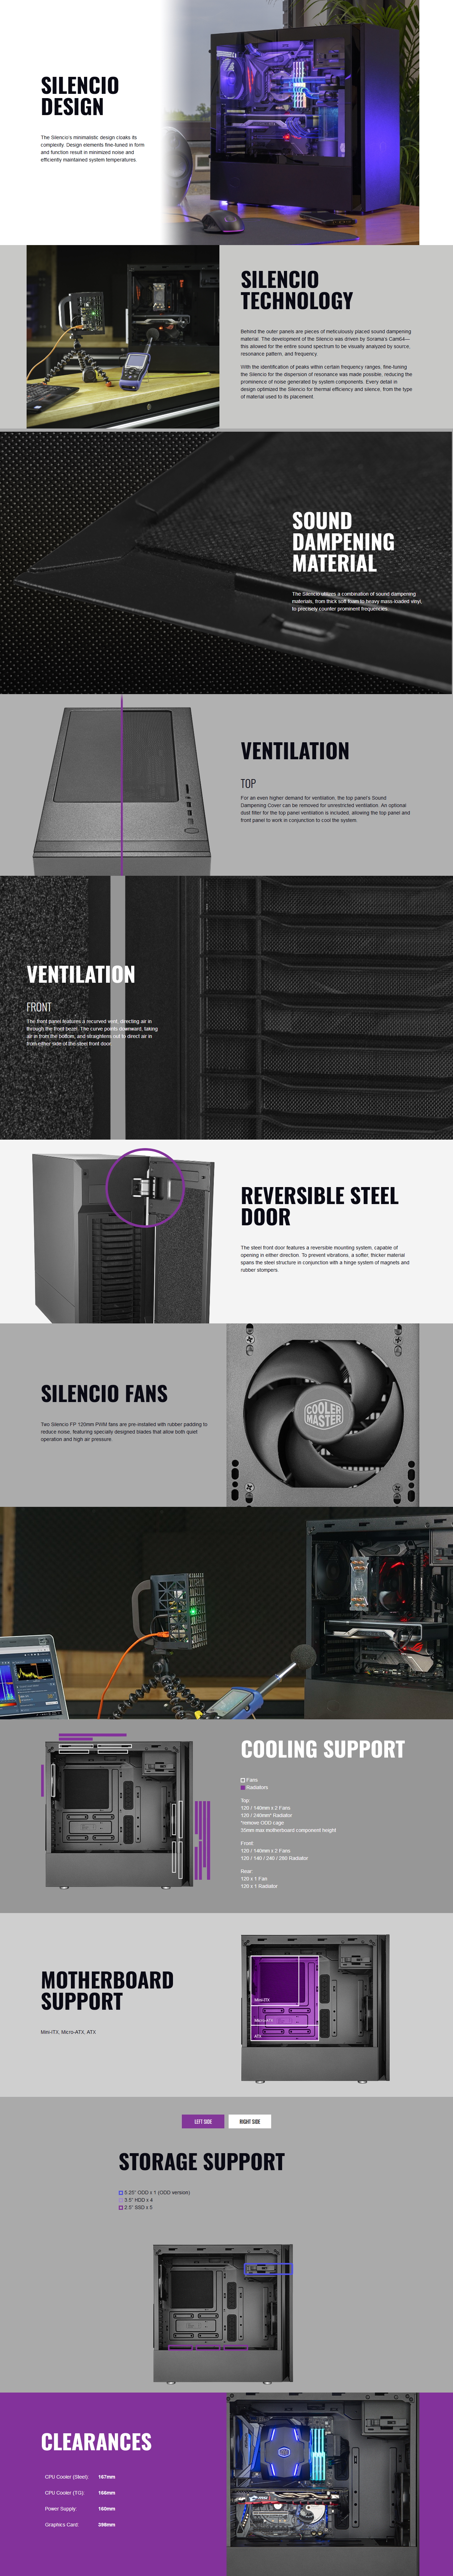 A large marketing image providing additional information about the product Cooler Master Silencio S600 Steel Mid Tower Case - Black - Additional alt info not provided